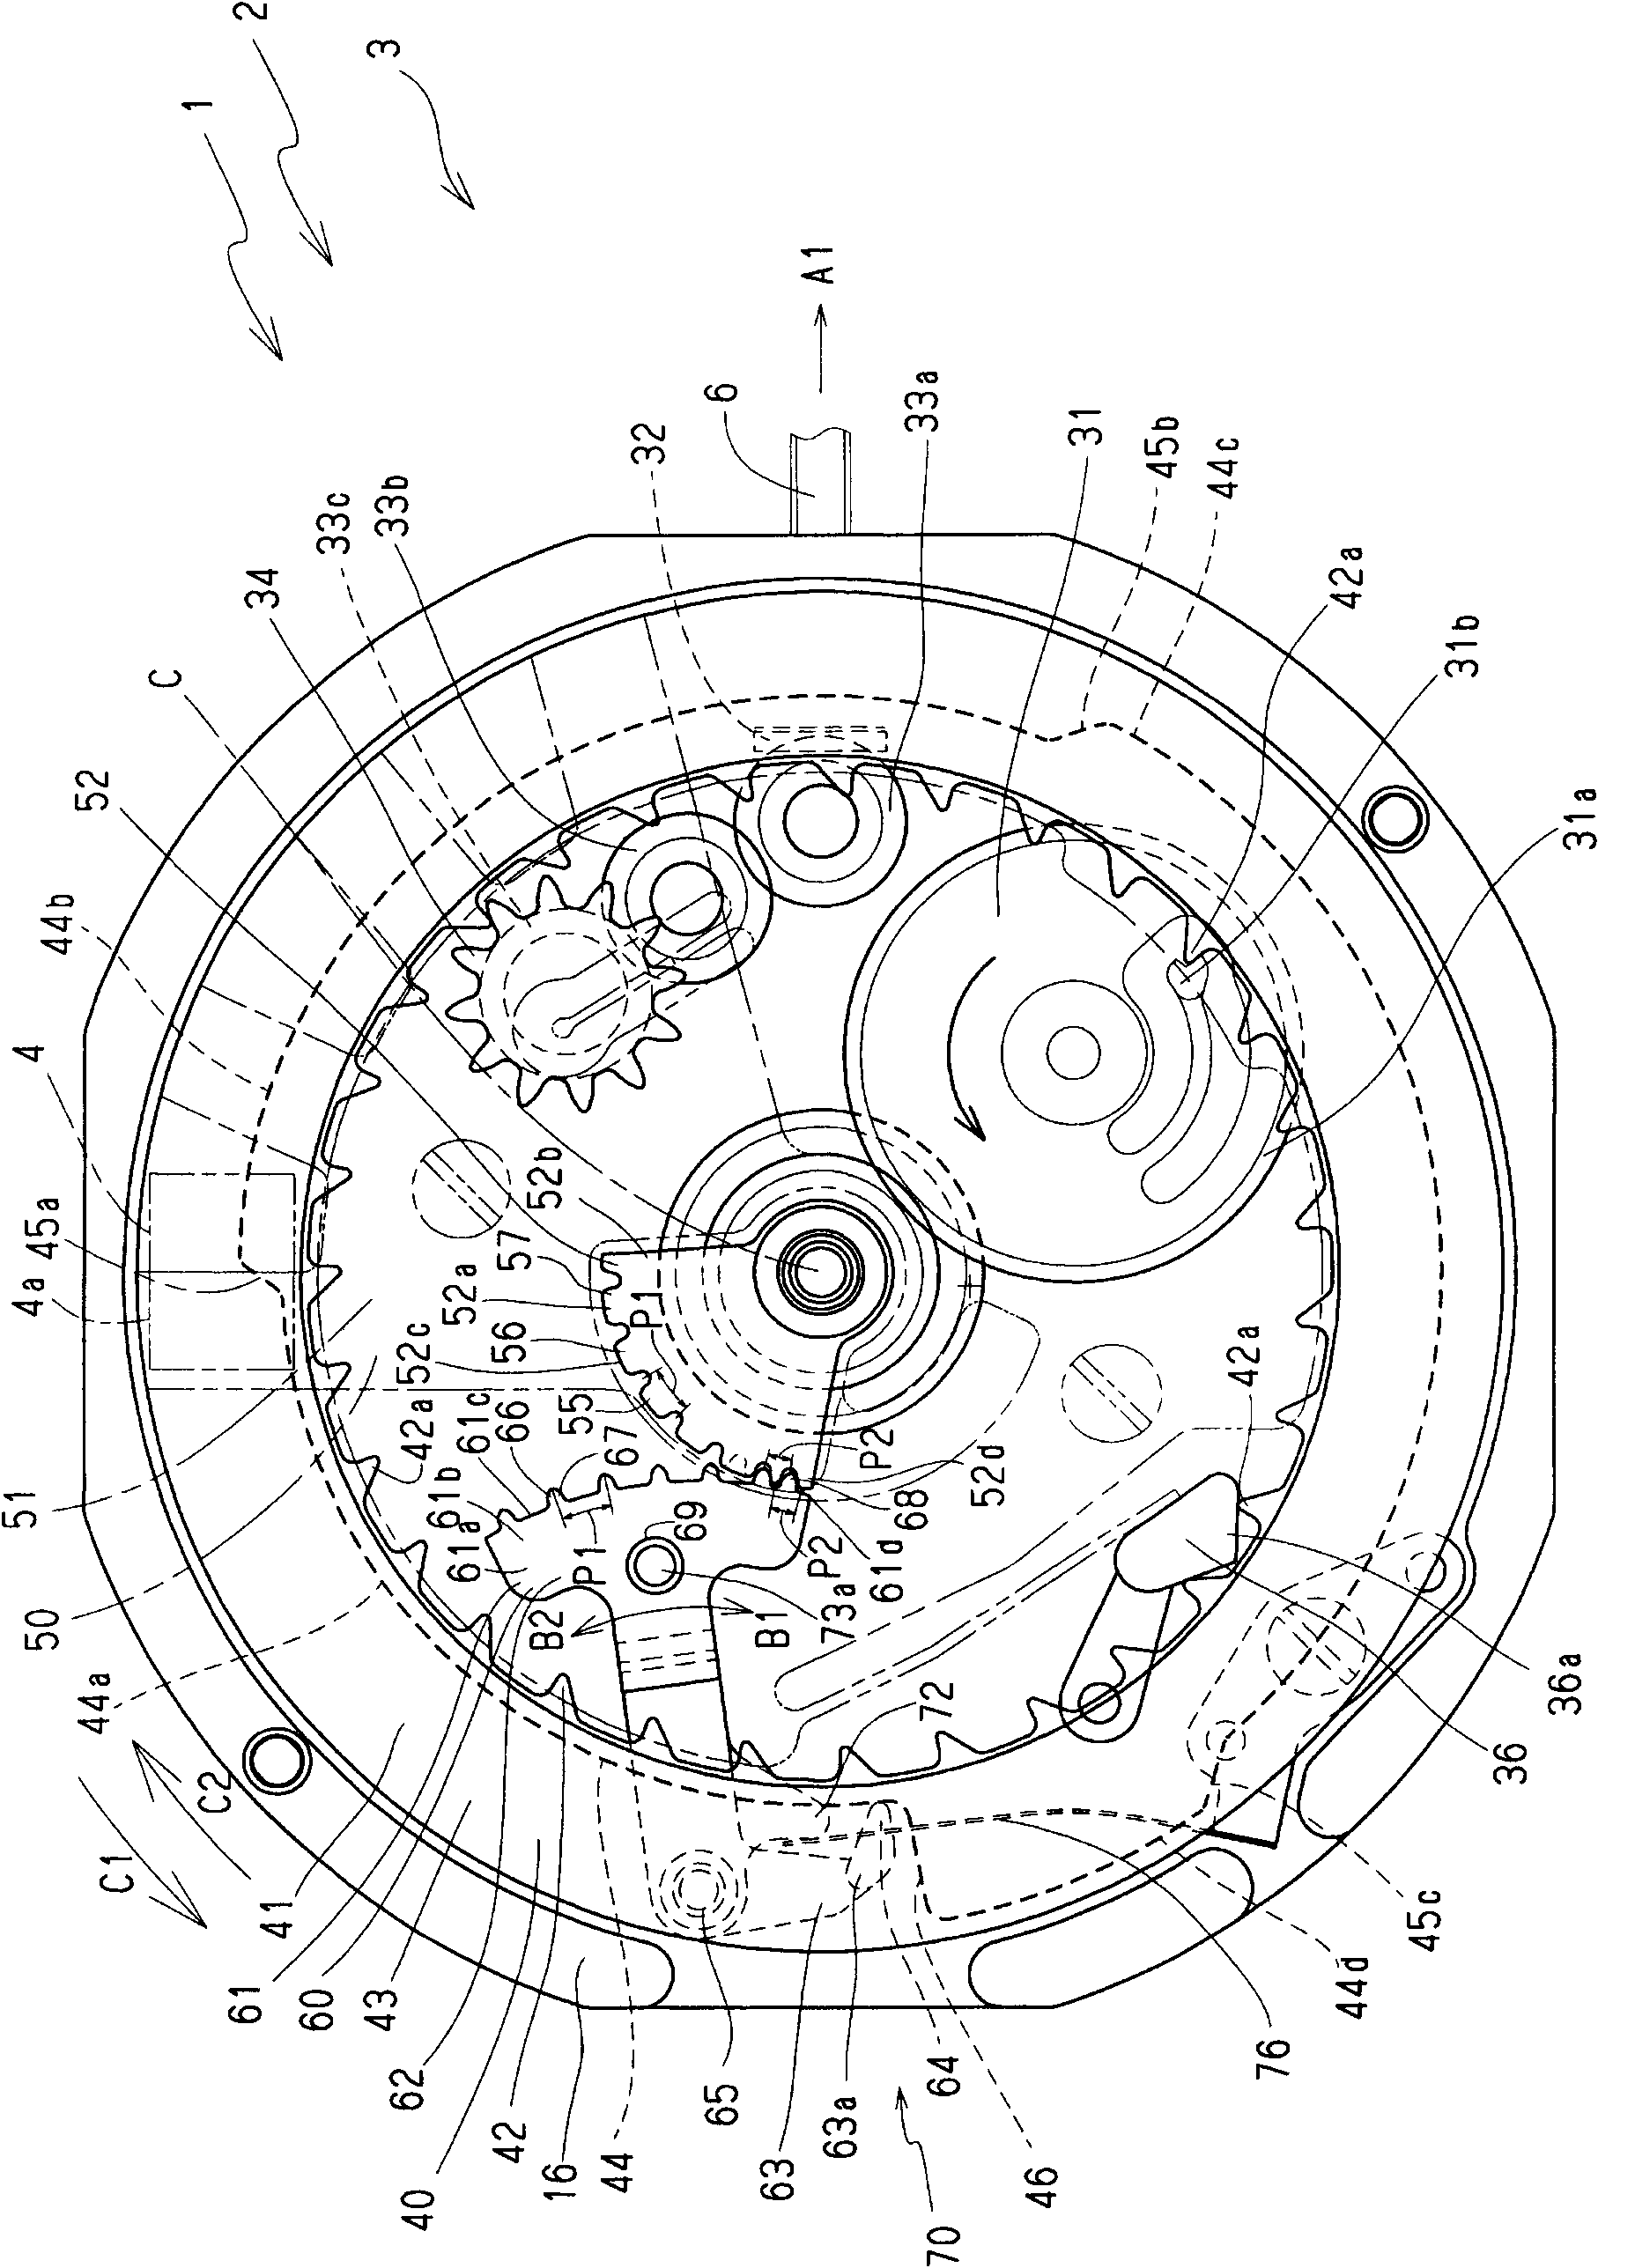 Calendar mechanism and analog timepiece equipped with same mechanism